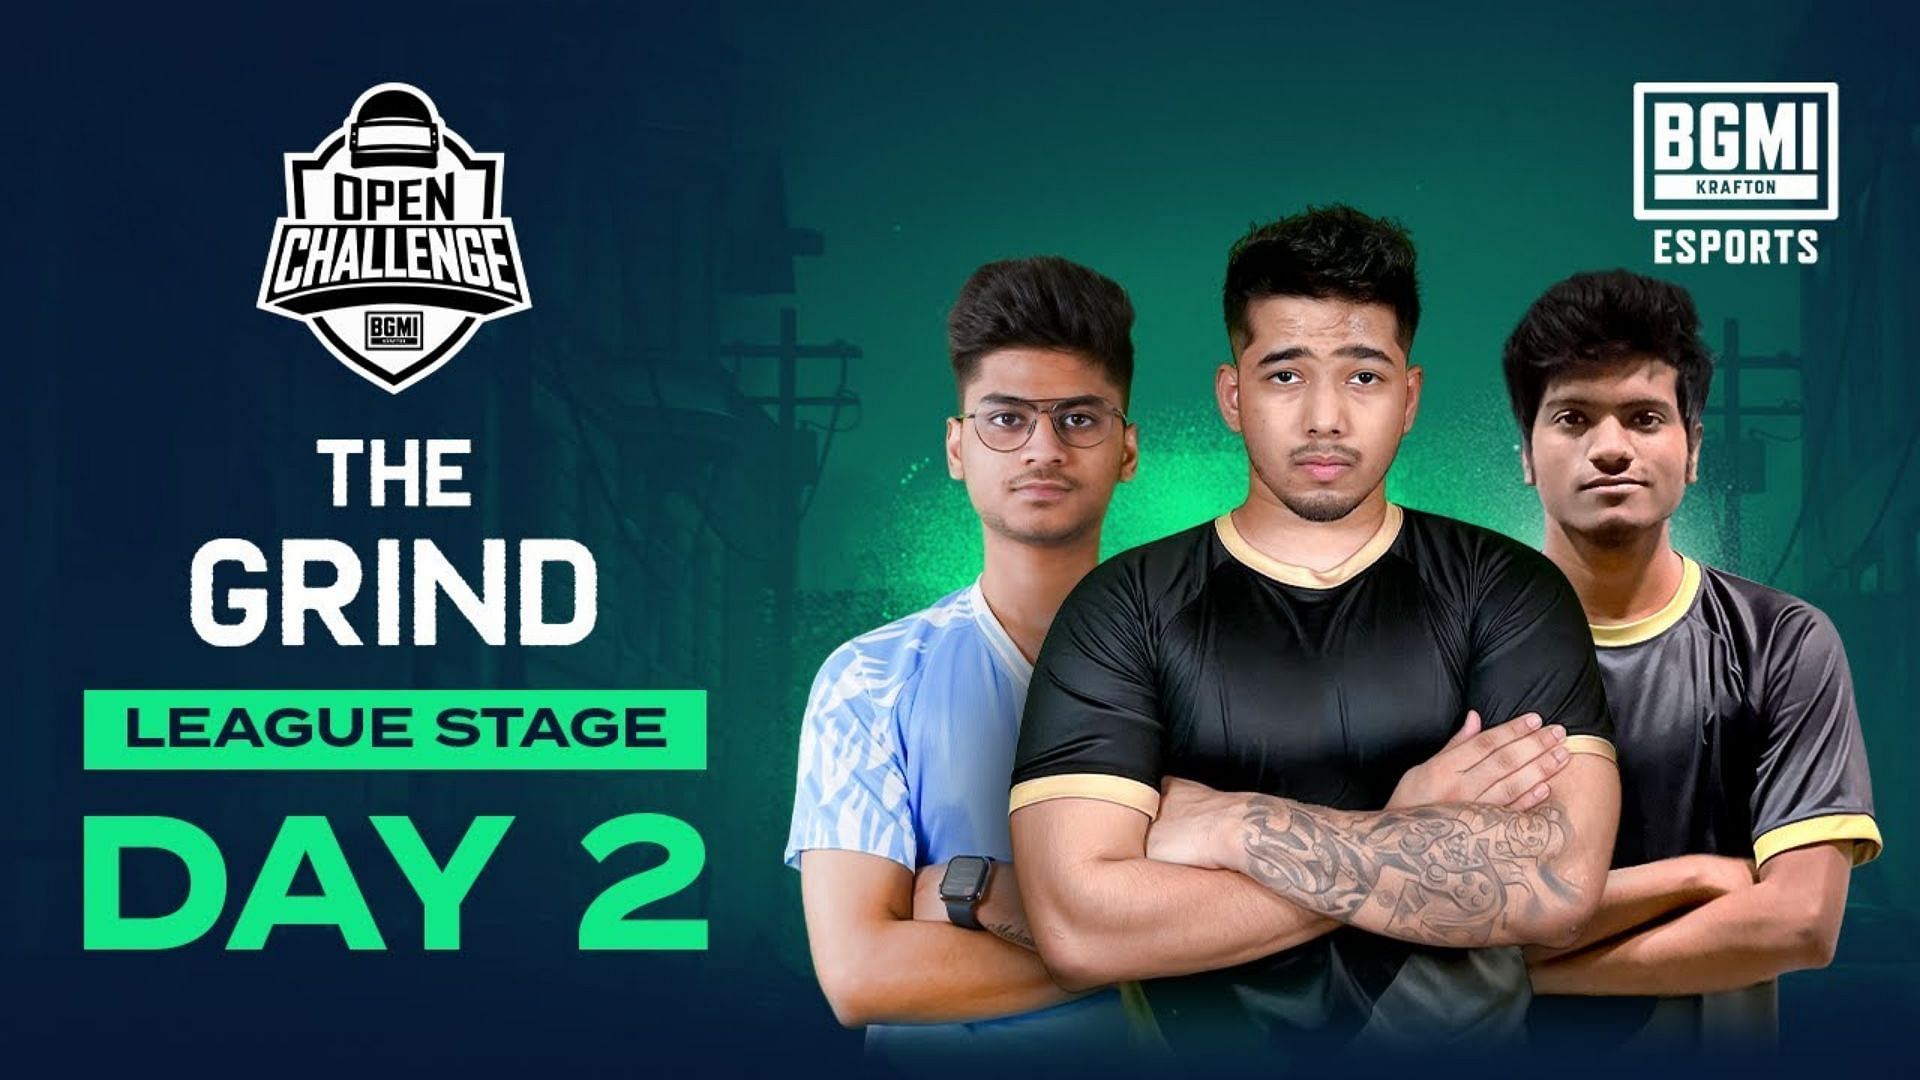 BMOC The Grind League Stage Day 2 (Image via BGMI)